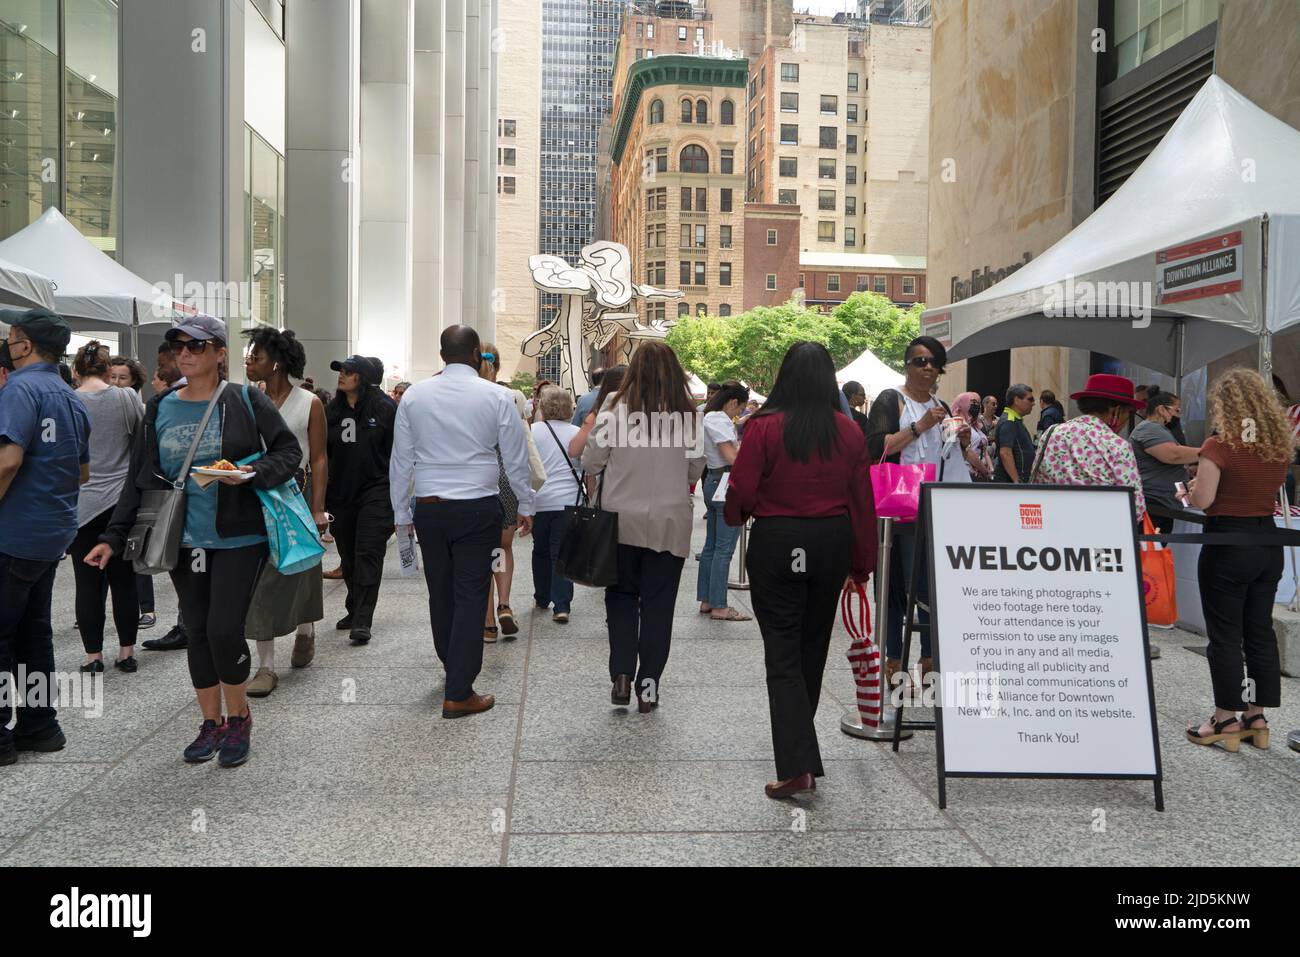 After a two-year hiatus because of the pandemic, Dine Around Downtown, a food festival in Lower Manhattan, returned to Fosun Plaza. Stock Photo